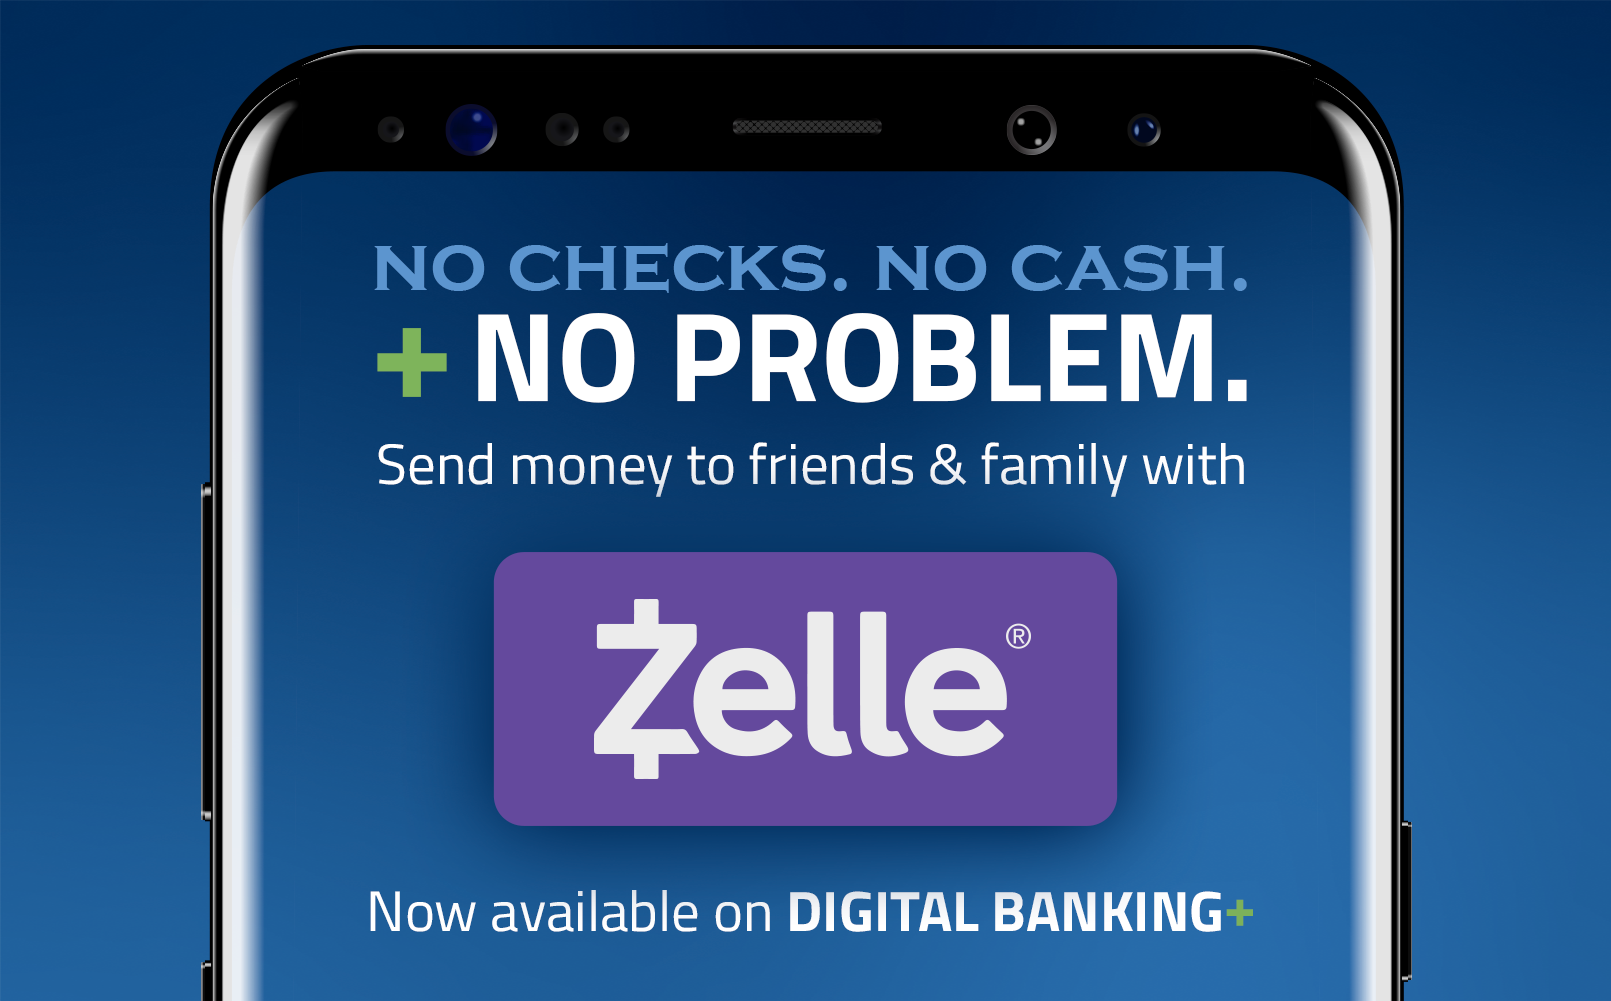 No Checks. No Cash. +No Problem. Send money to friends & family with Zelle. Now available on Digital Banking +